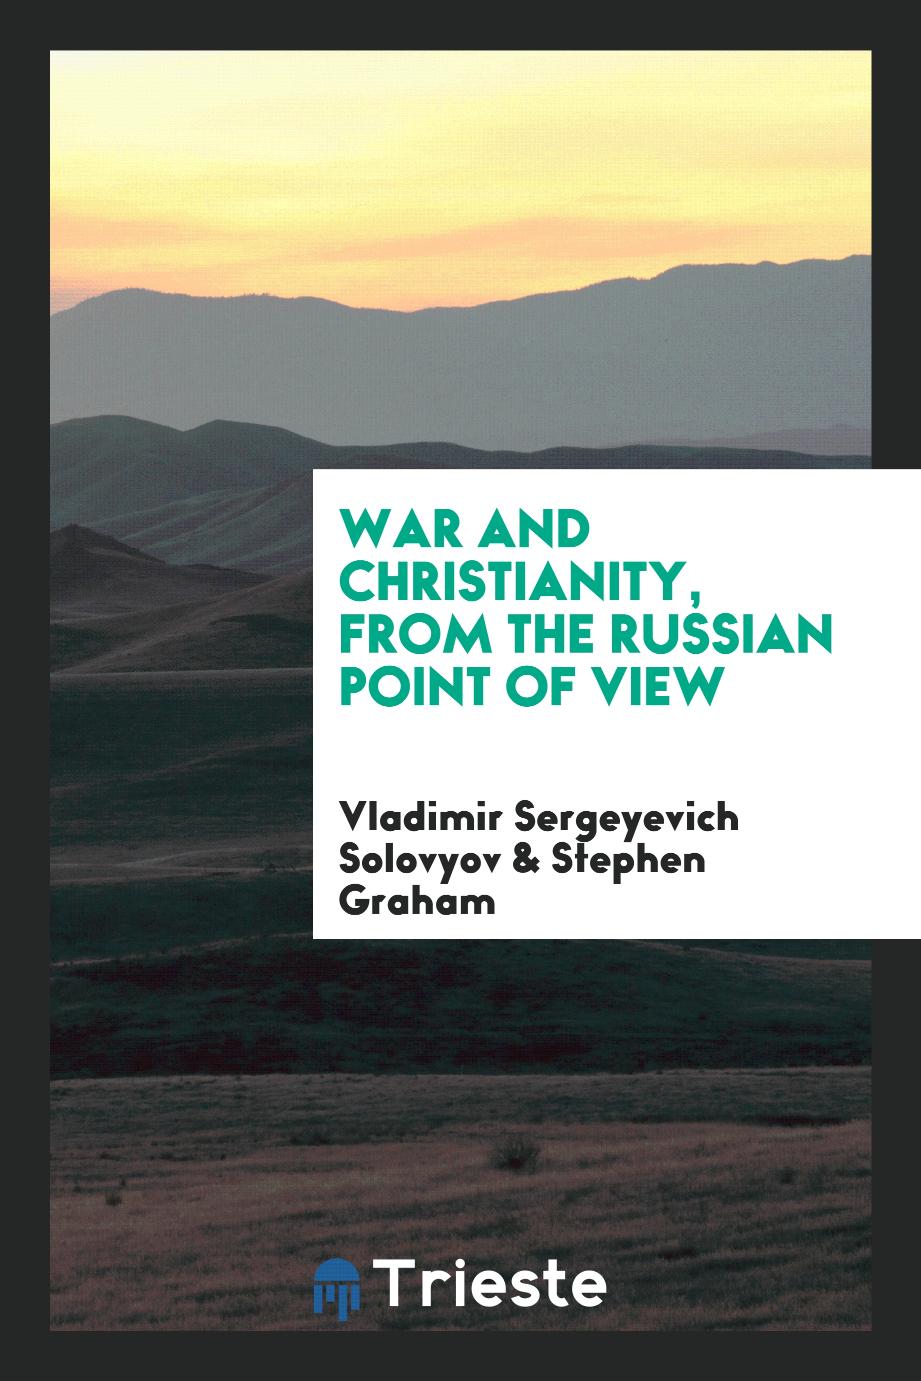 War and Christianity, from the Russian point of view